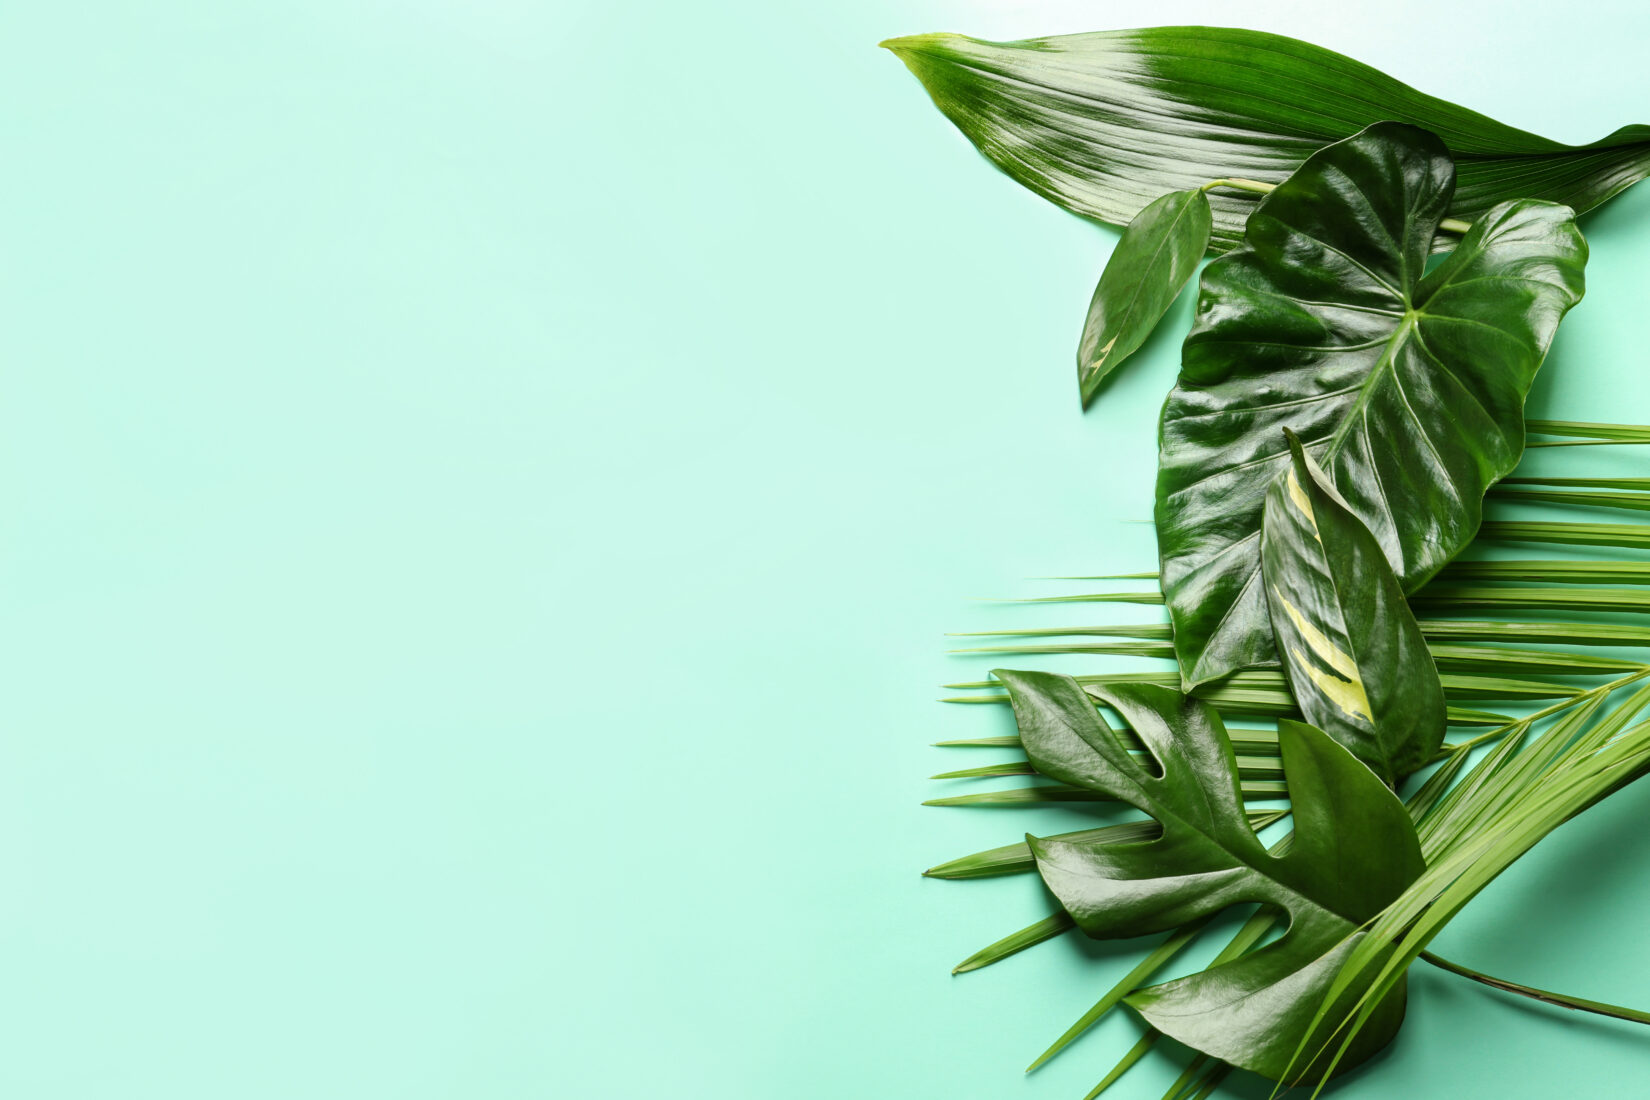 Assorted tropical foliage including Monstera, palm fronds and other green leaves arranged on a light turquoise background.